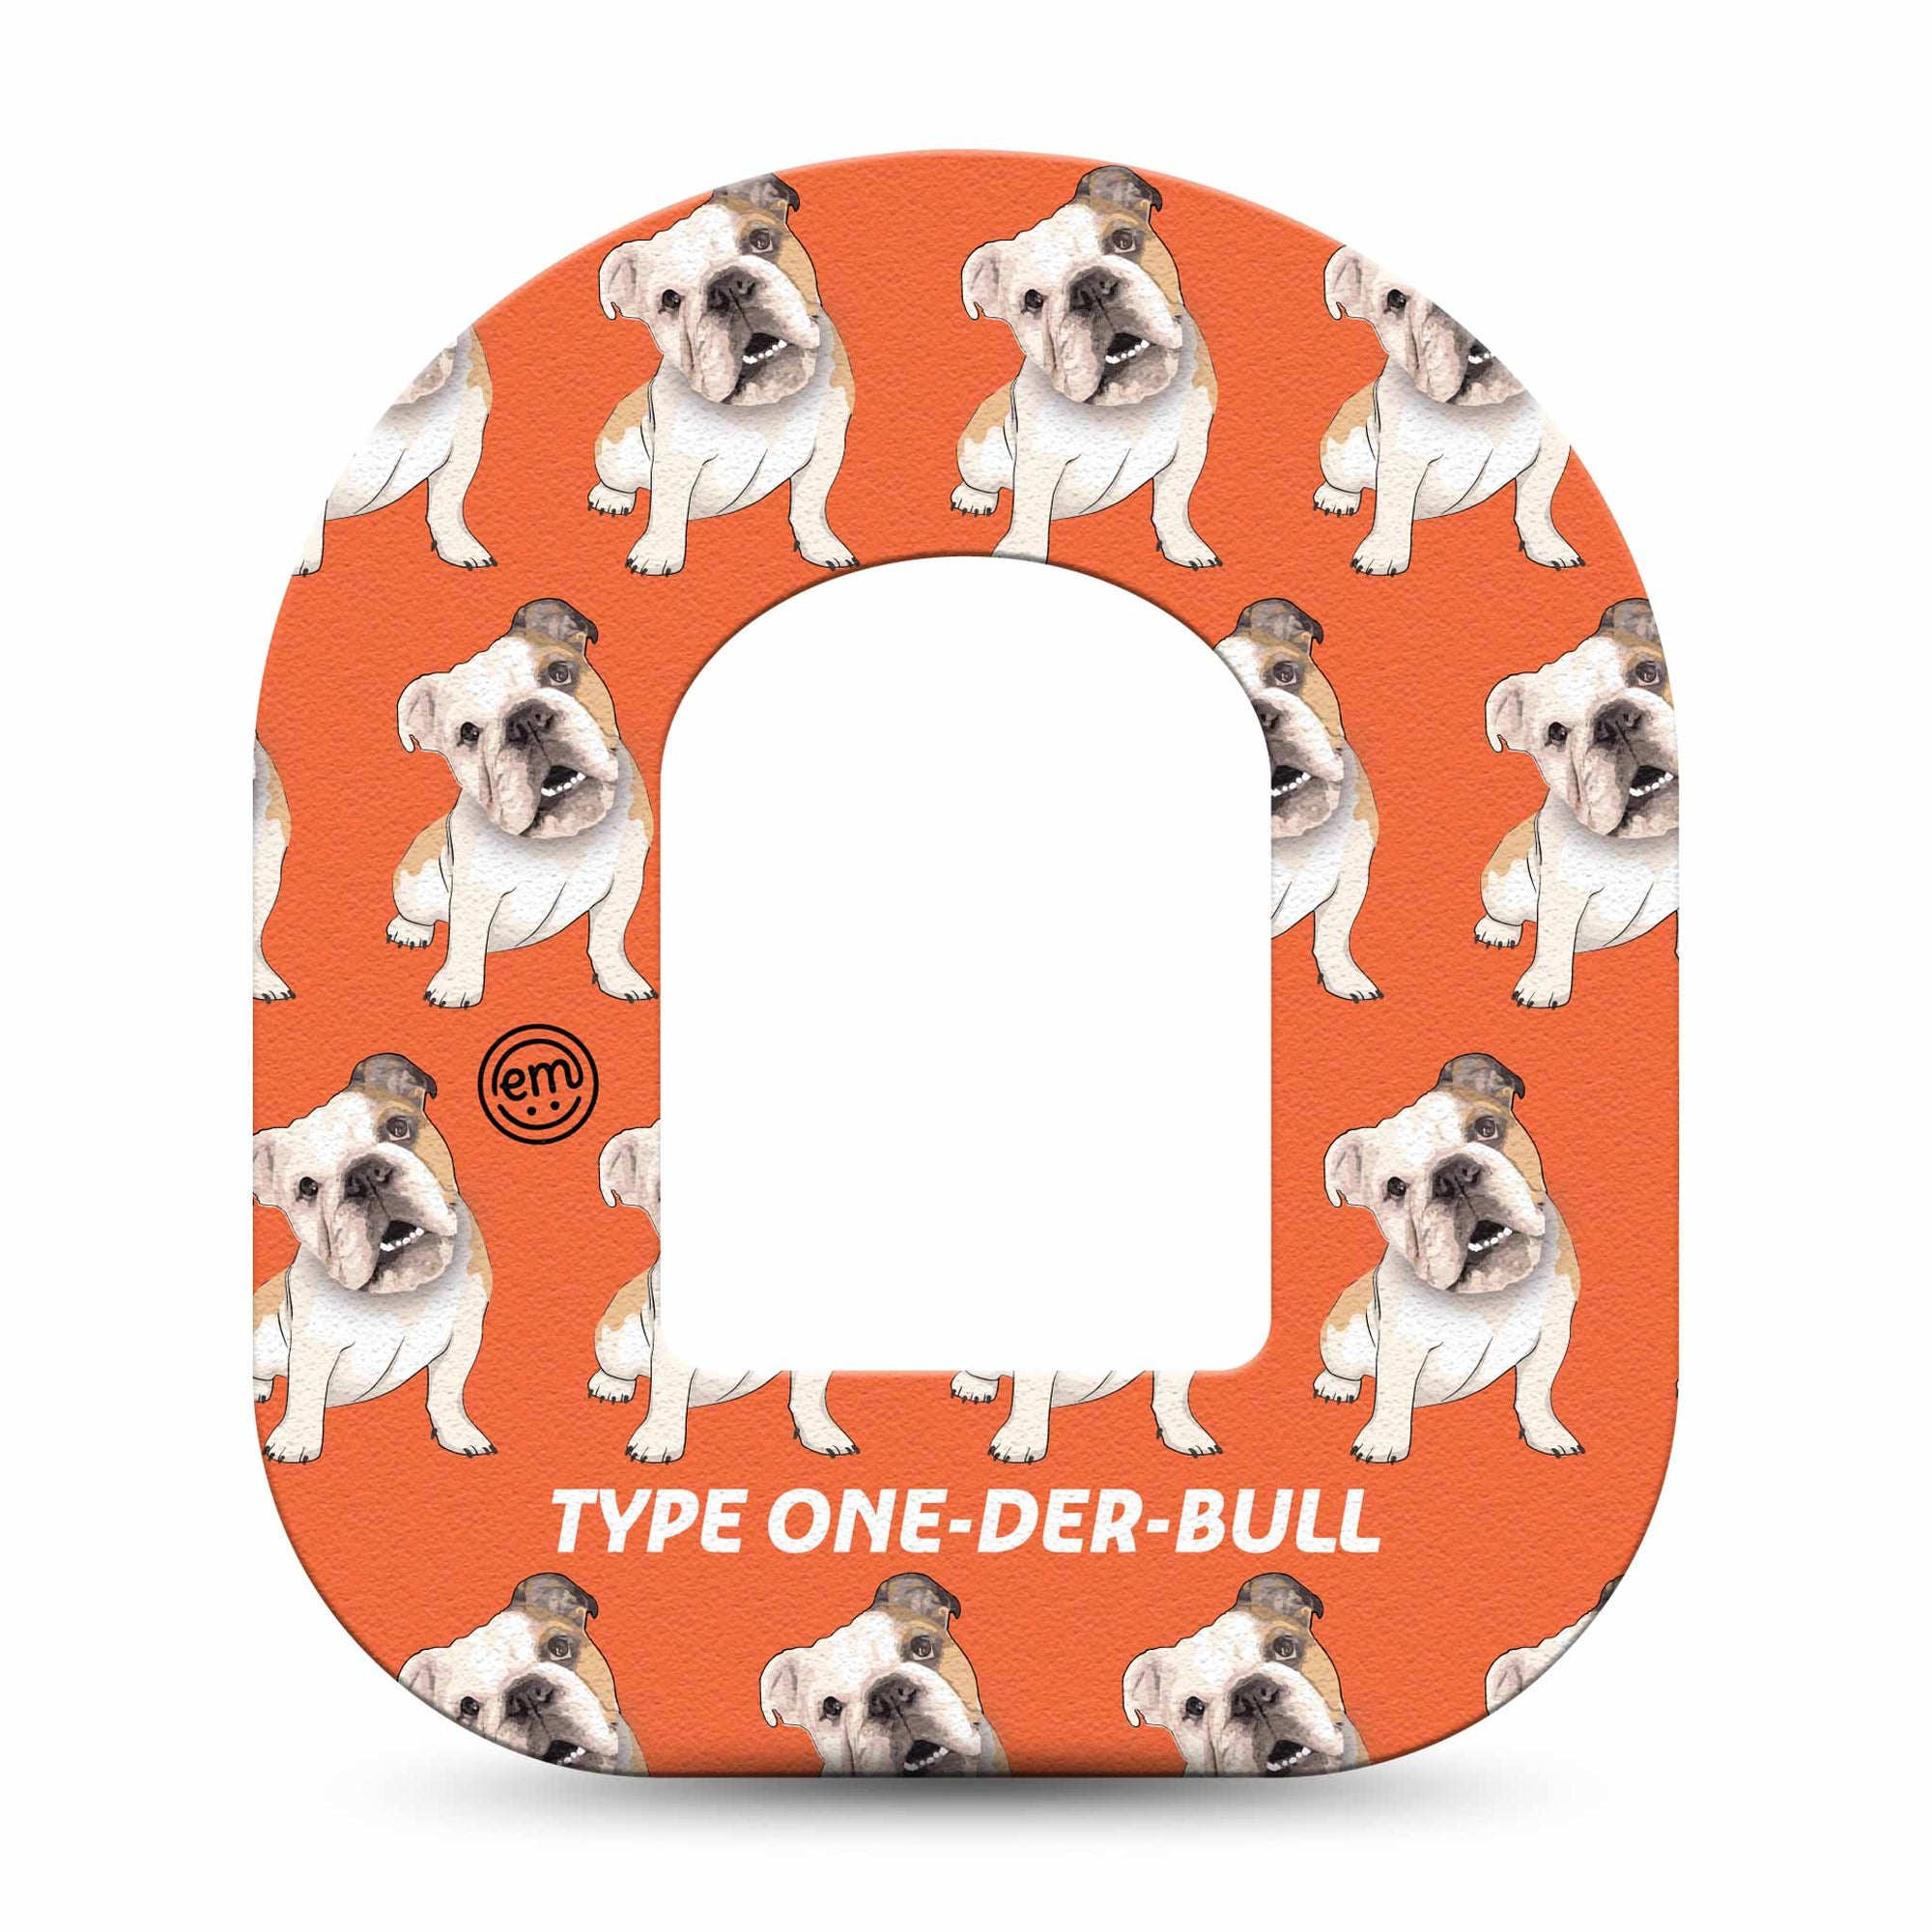 ExpressionMed Type One-Der-Bull Pod Tape